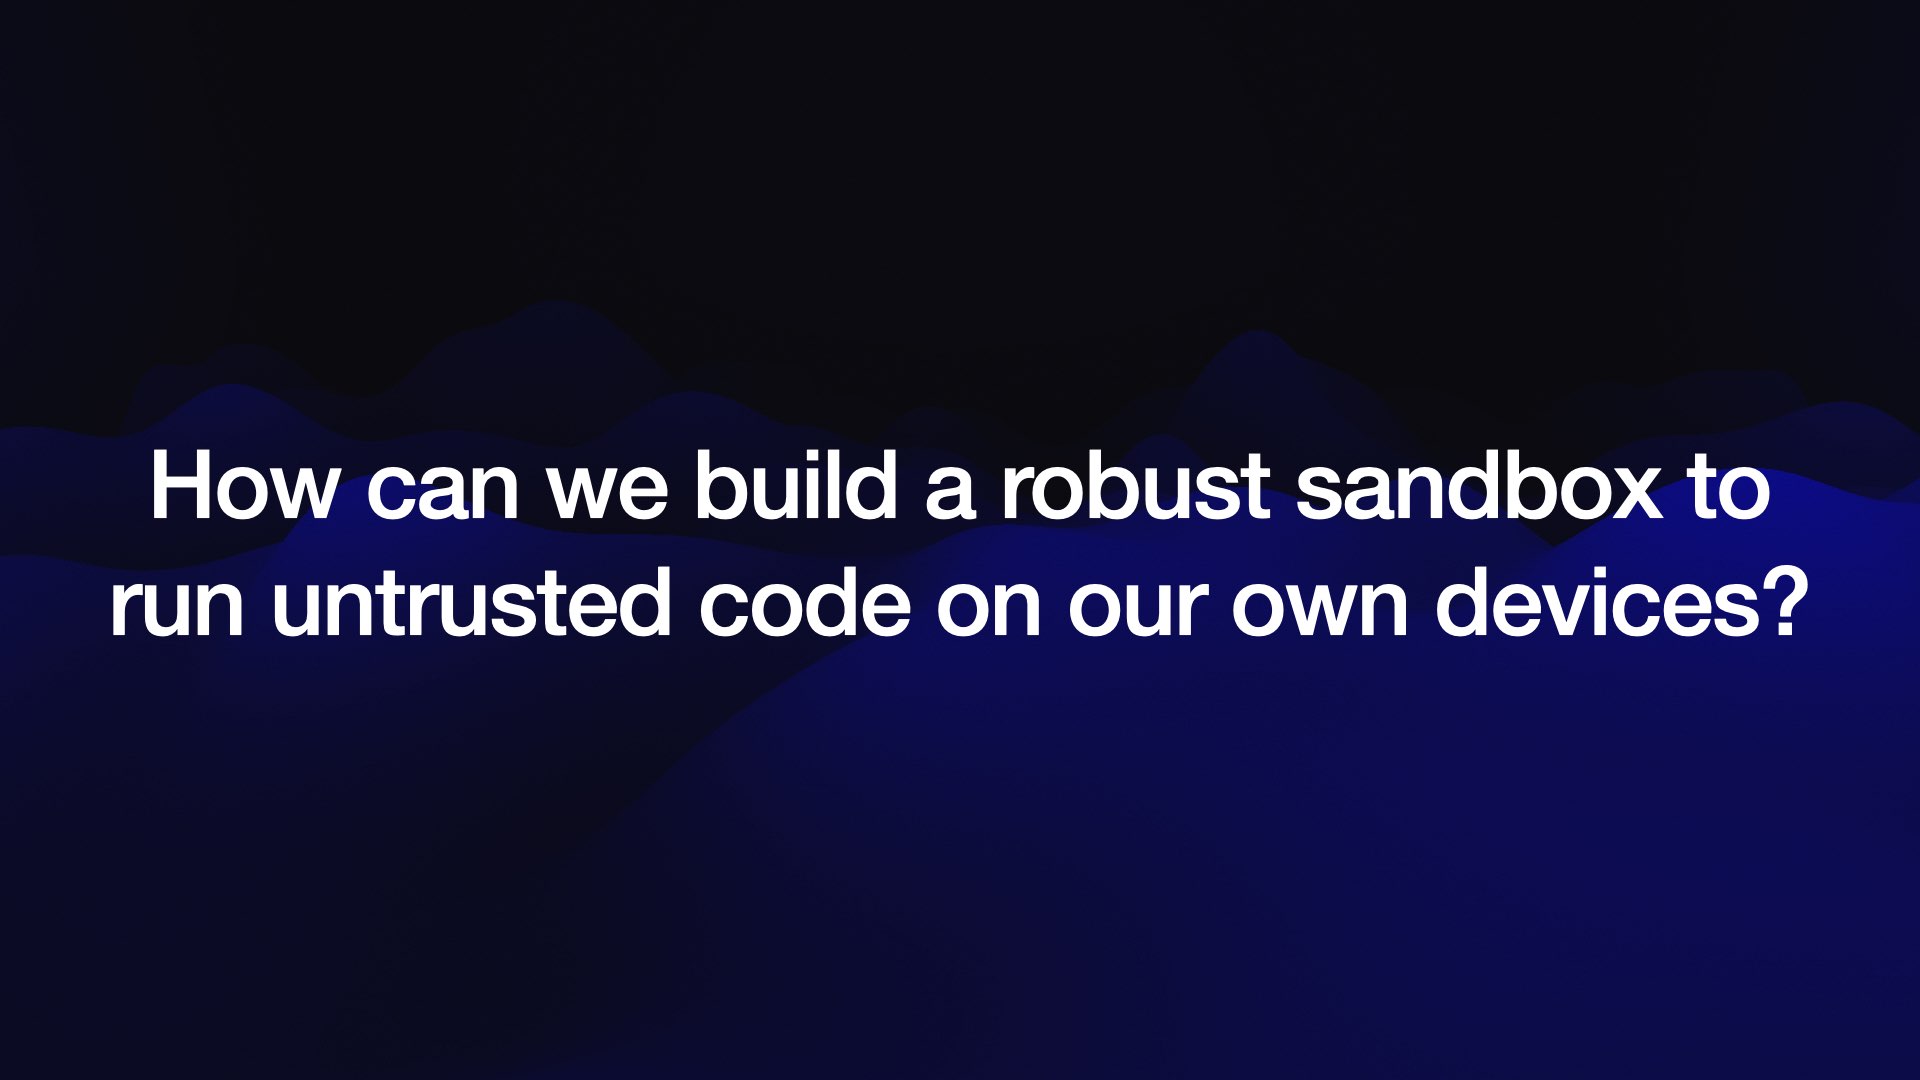 How can we build a robust sandbox to run untrusted code on our own devices?